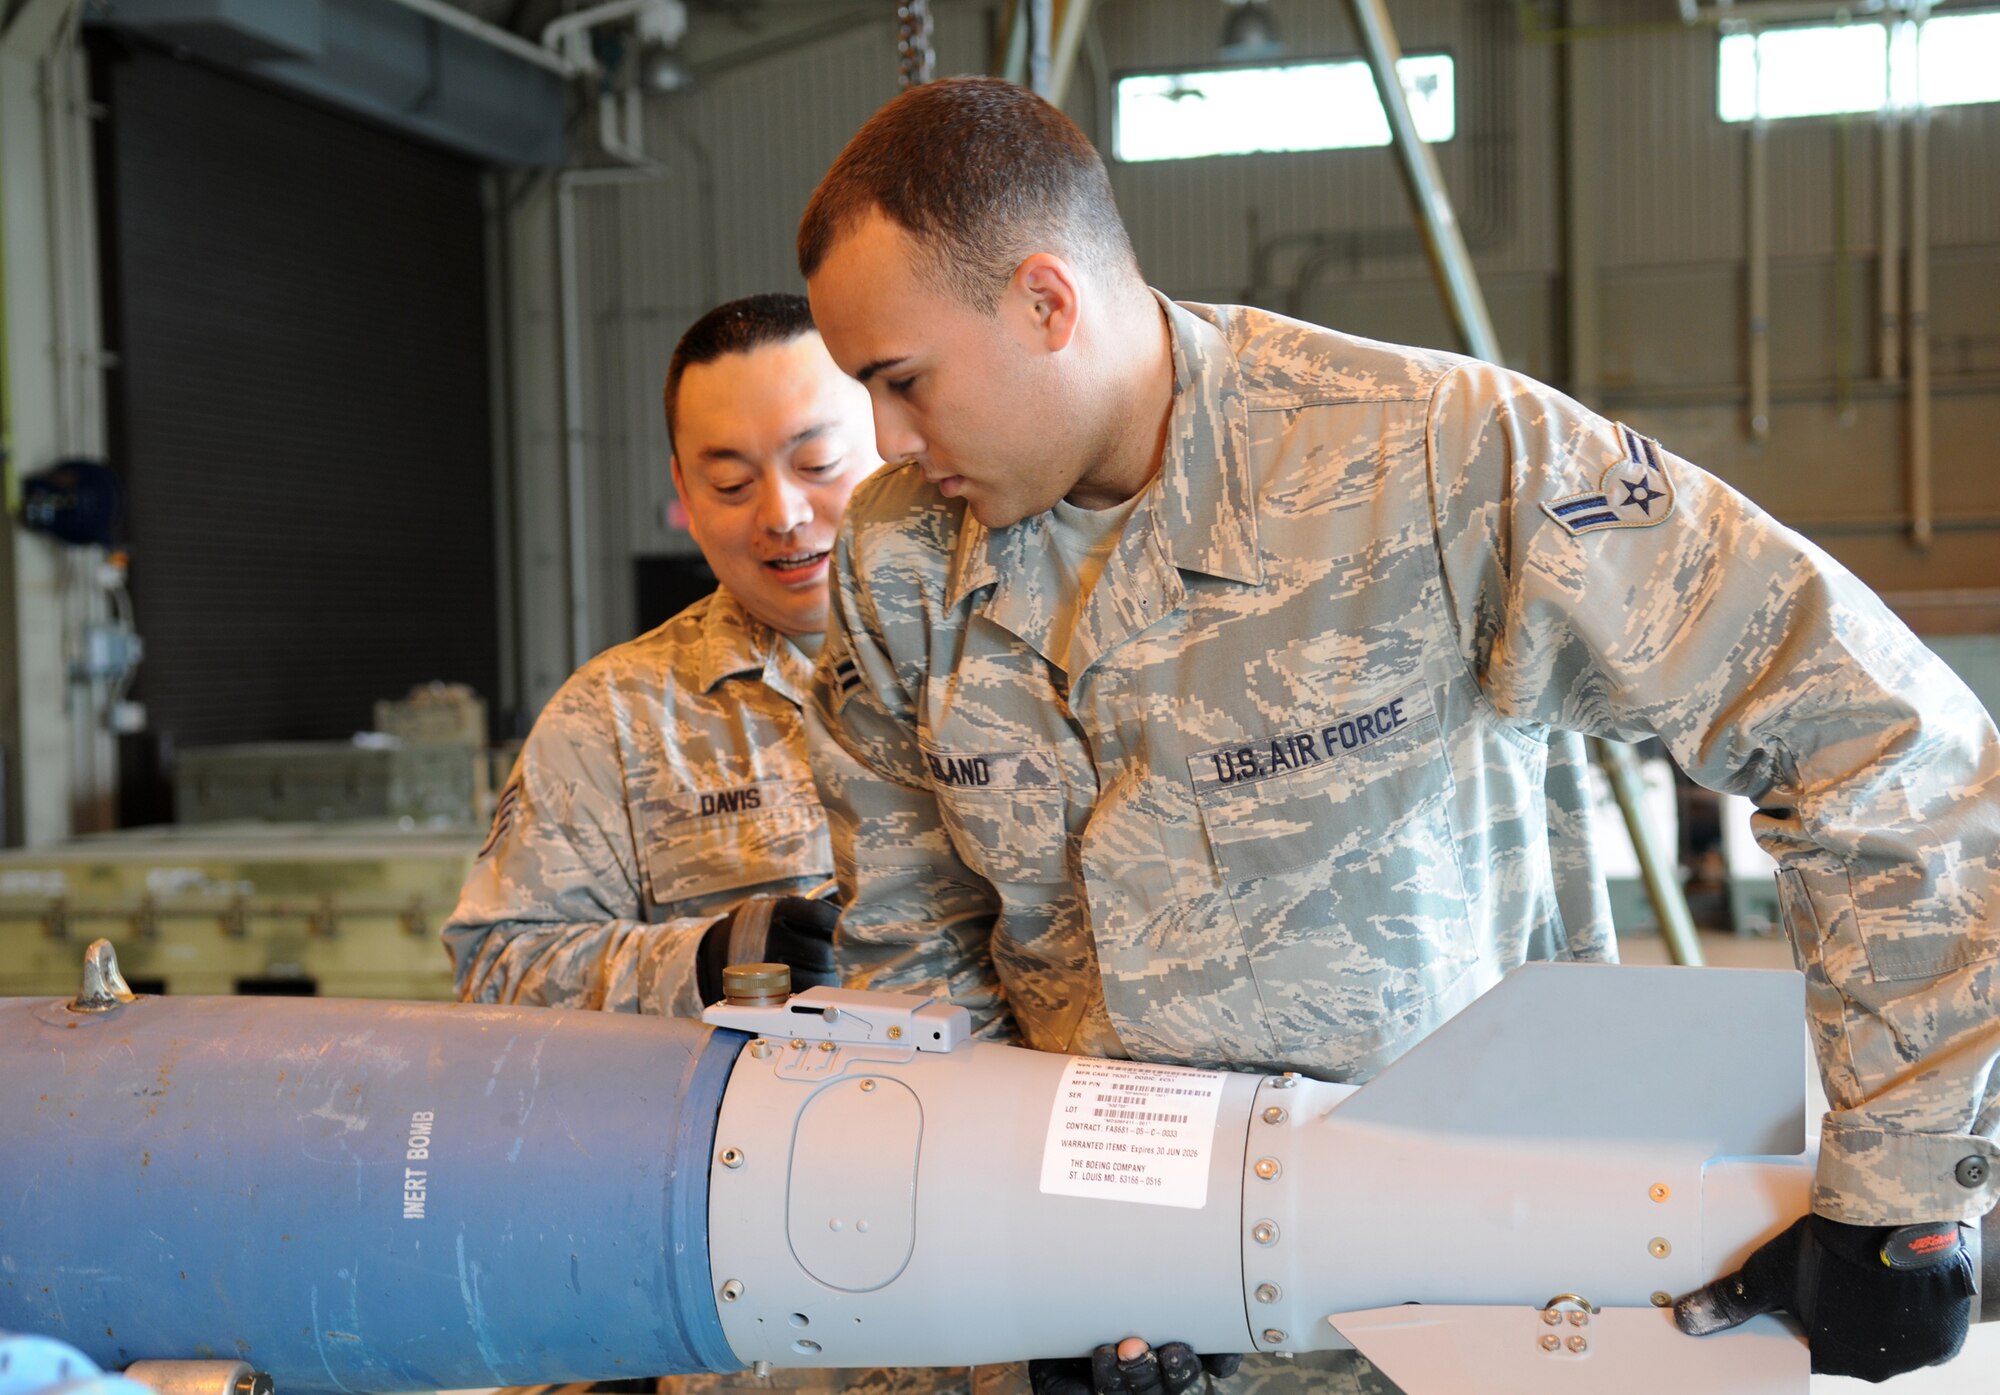 MISAWA AIR BASE, Japan -- Airman 1st Class Michael Eiland and Staff Sgt. James Davis, both from the 35th Maintenance Squadron munitions flight, attach a fin assembly to a GBU-38 body June 9, 2009. The fin contains a guidance system with GPS that allows for more precise targeting. (U.S. Air Force photo by Staff Sgt. Rachel Martinez)